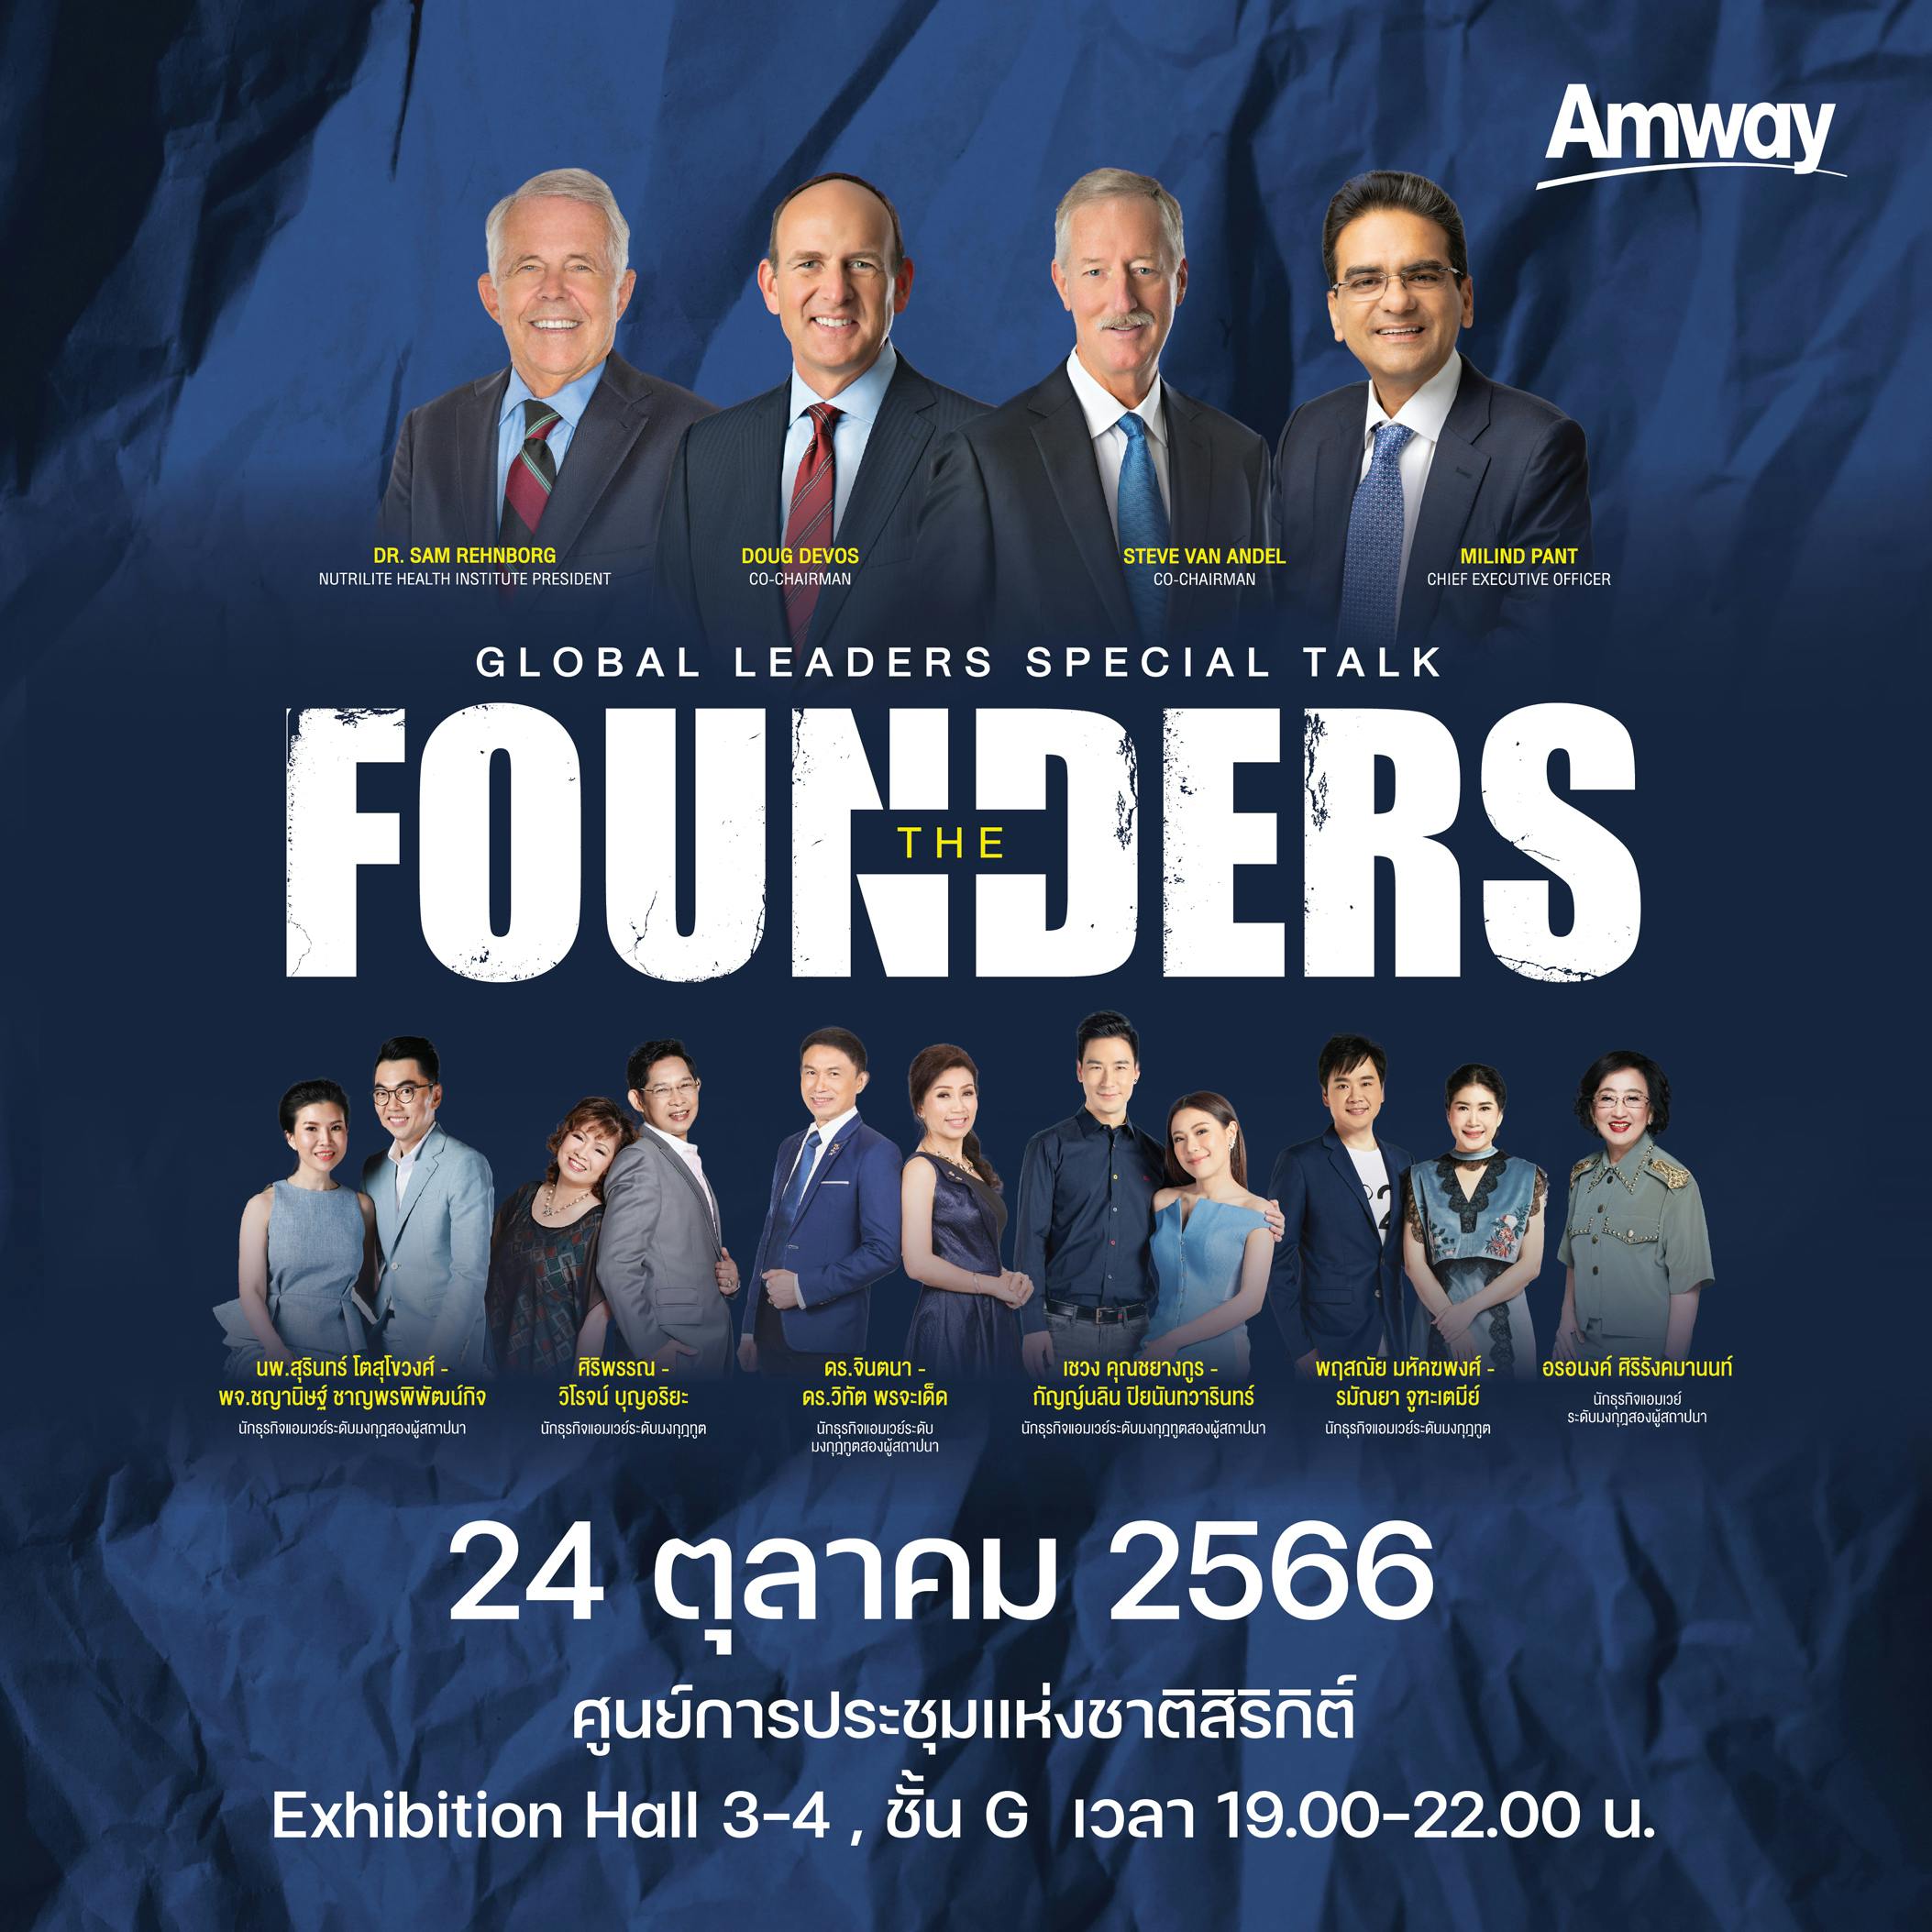 THE FOUNDERS